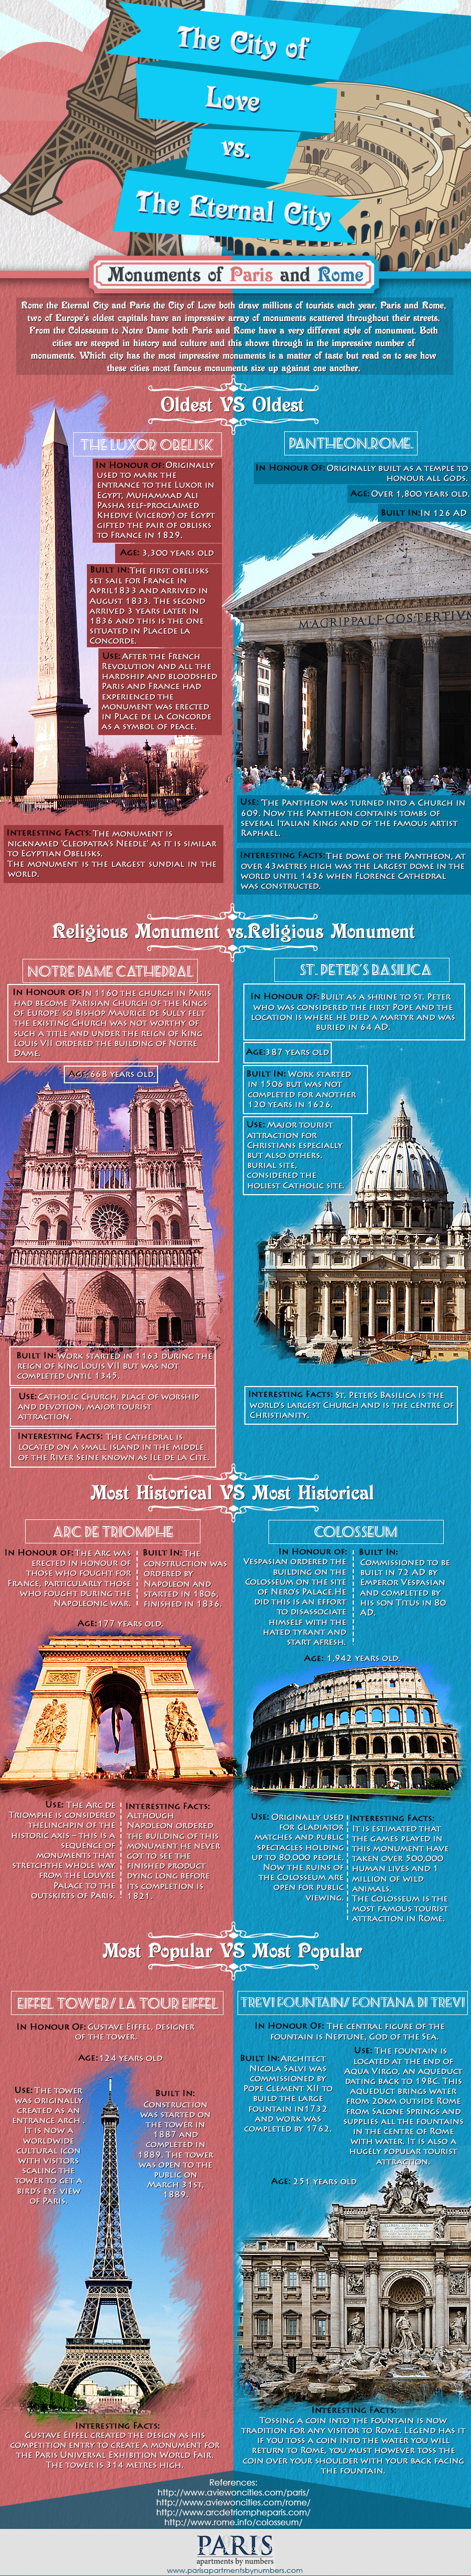 Monuments of Paris and Rome